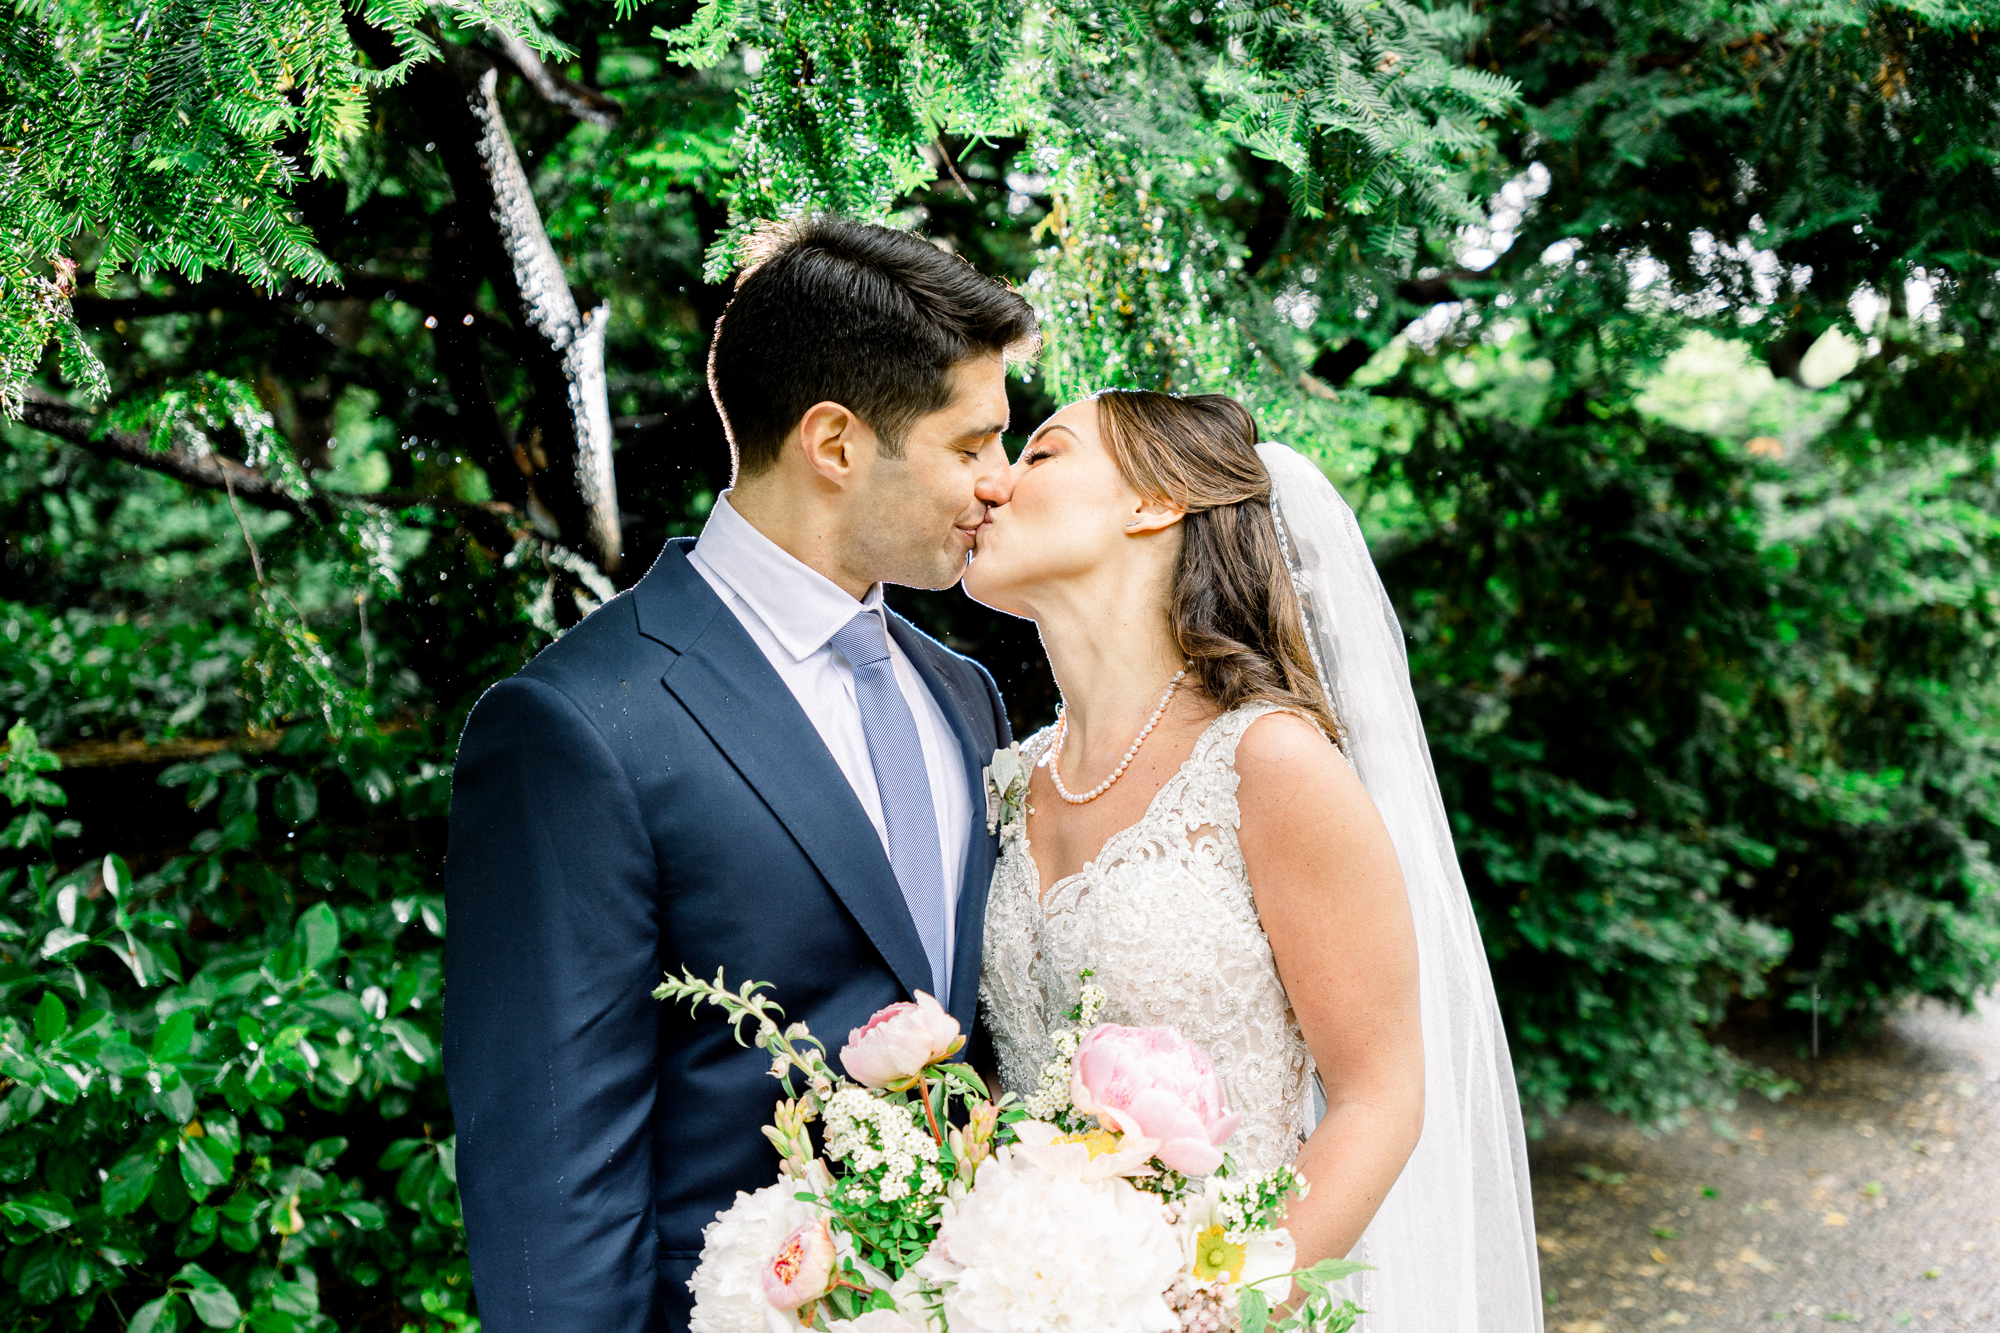 Jaw-dropping New York Wedding Photos in Conservatory Garden